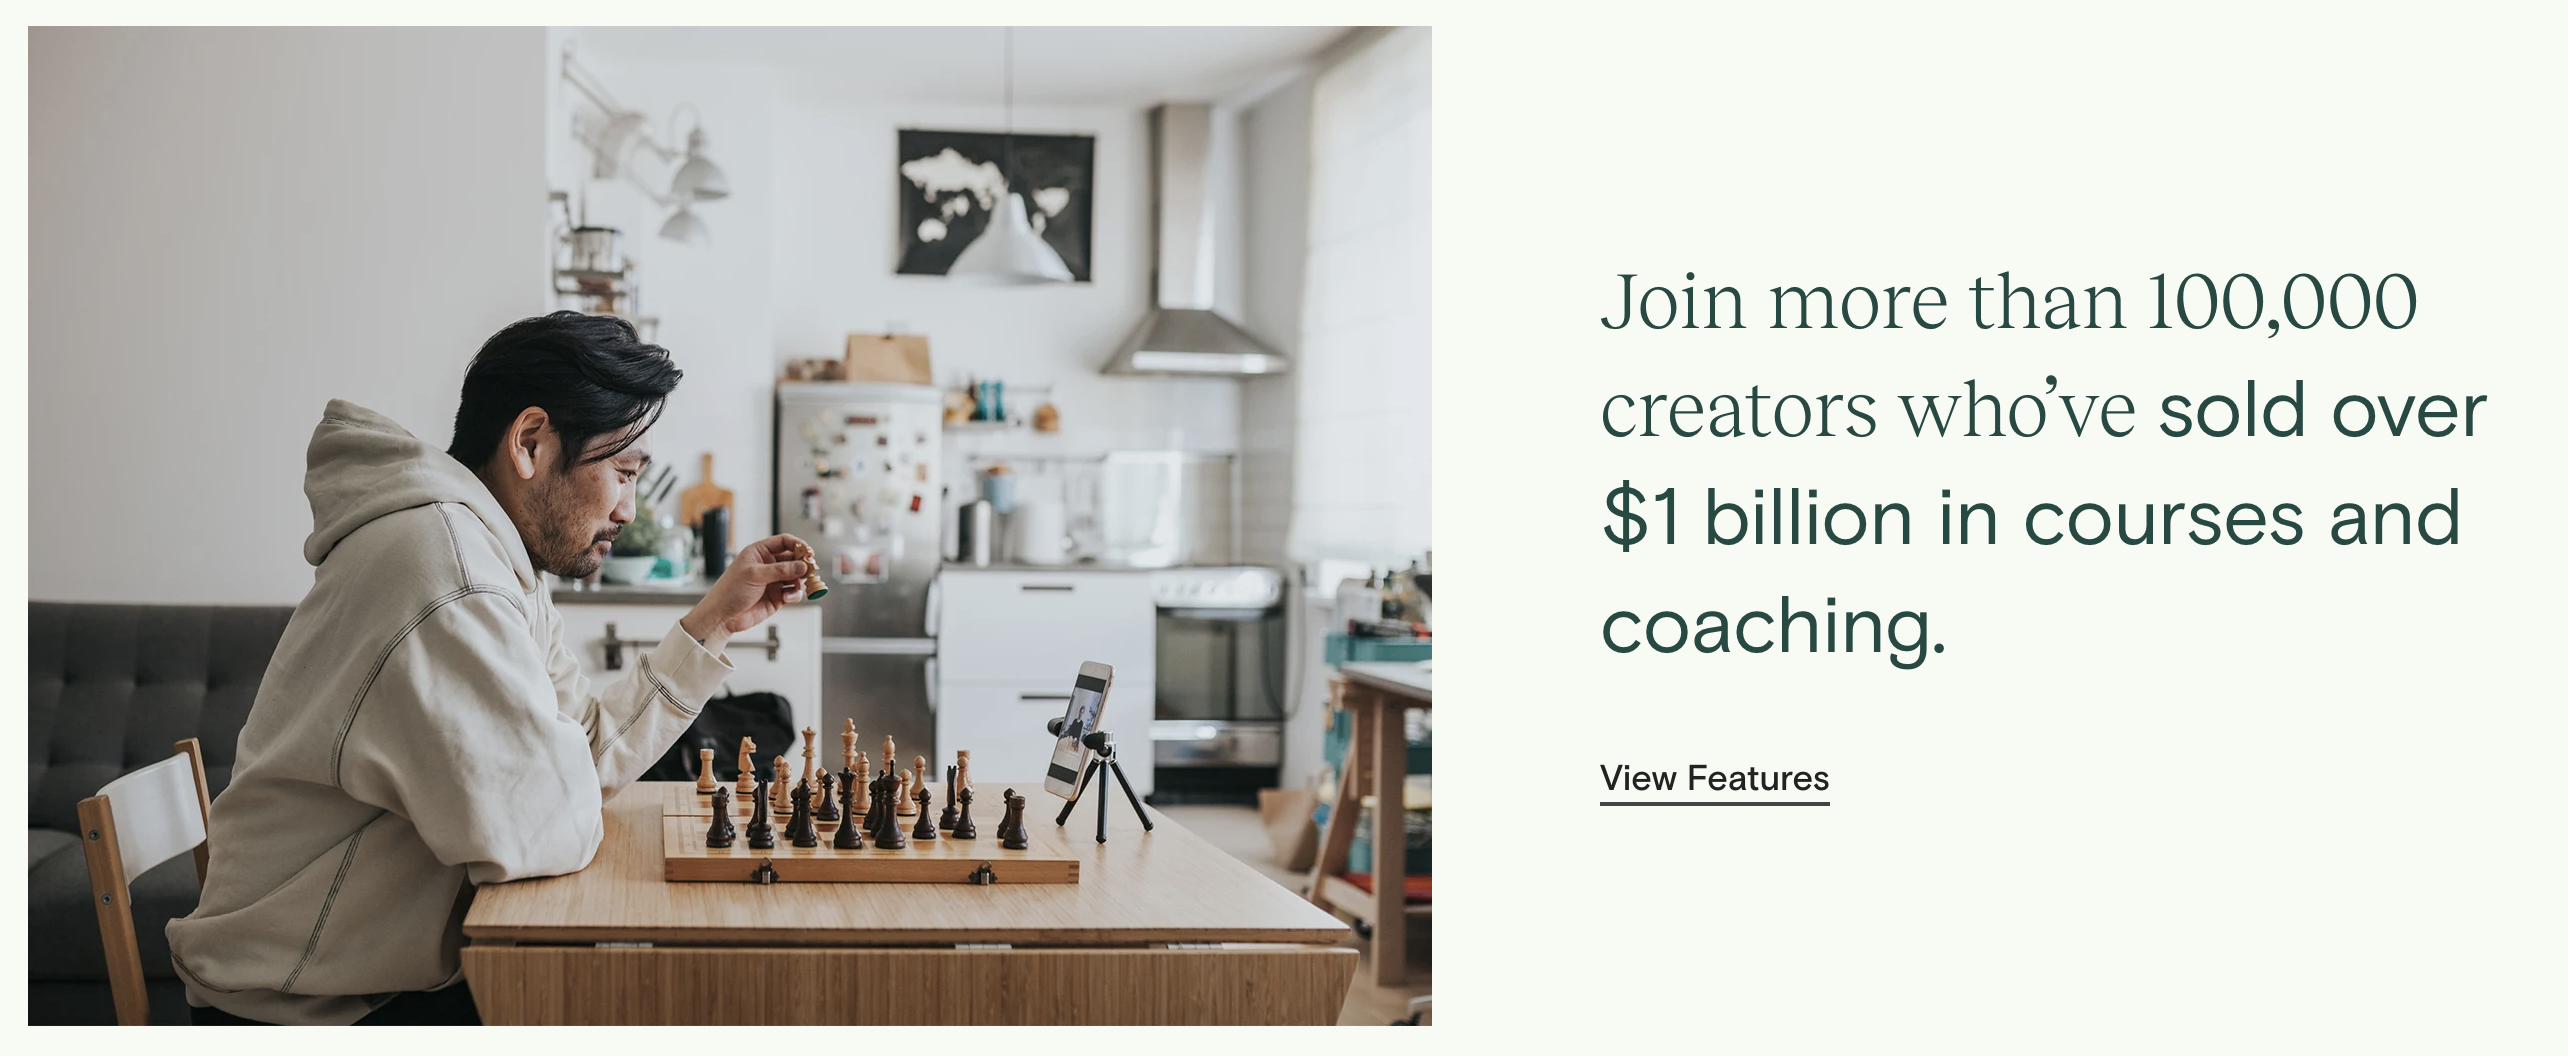 A screenshot of Teachable's user base on their website, stating more than 100,000 creators who've sold courses and coaching.